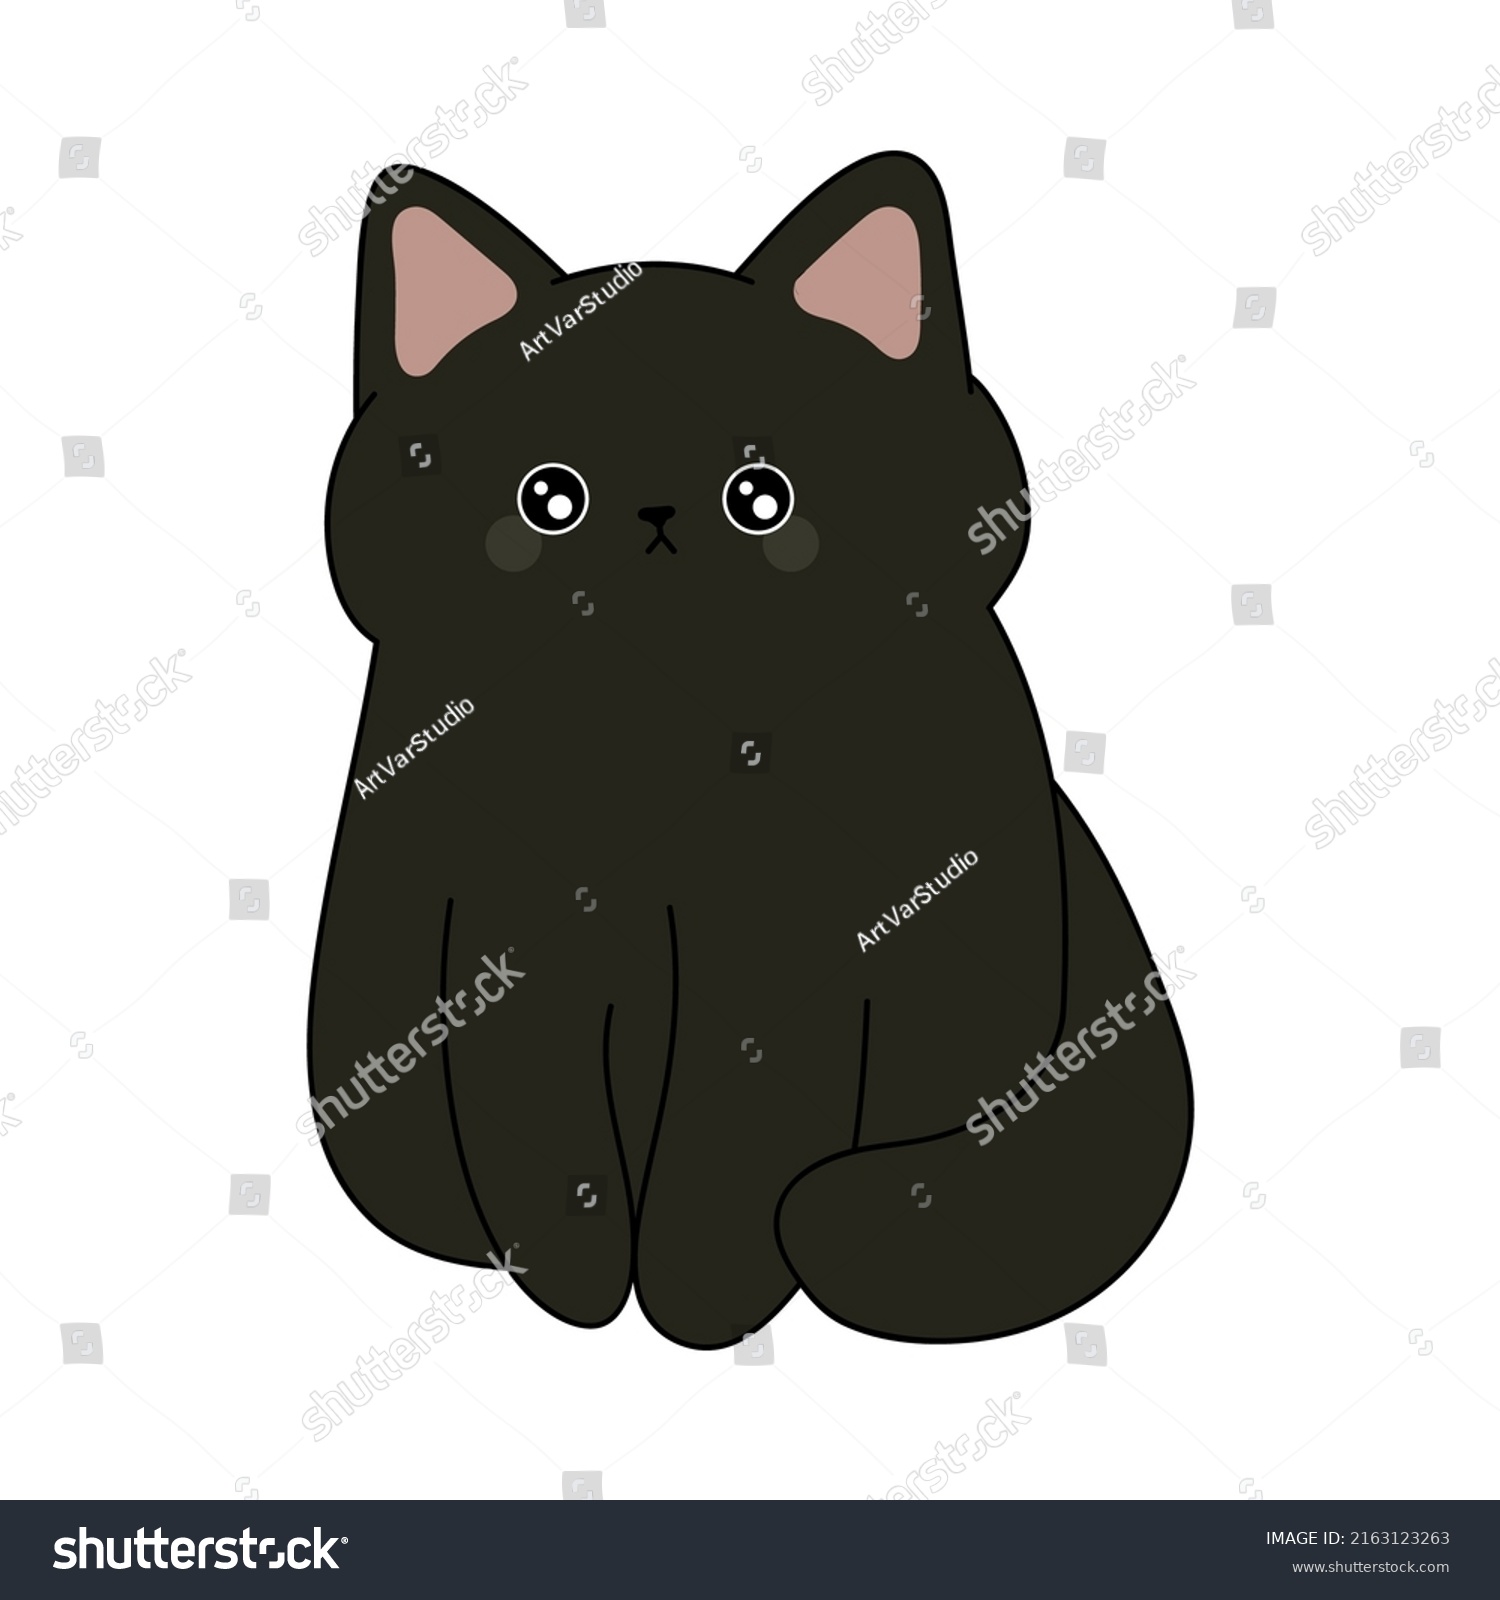 SVG of Funny black cat. Vector illustration of a cute kitten. Cute little illustration of cat for kids, baby book, fairy tales, covers, baby shower invitation, textile t-shirt. svg